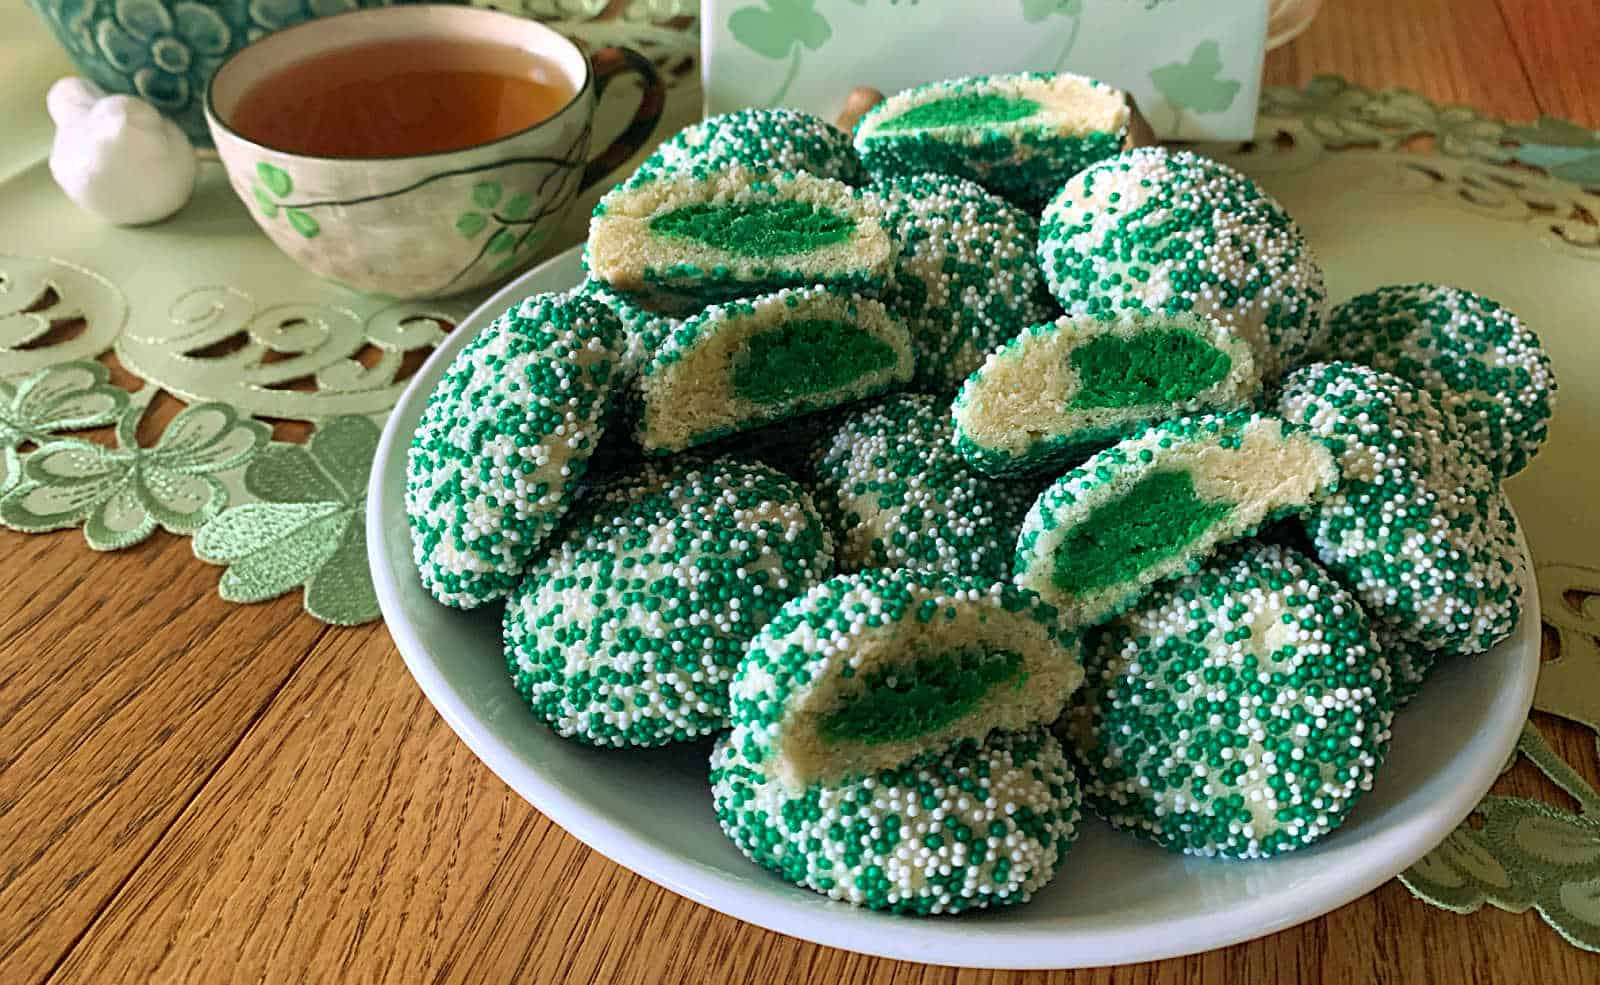 A plate of green and white sprinkled cookies, some cut in half to show green centers, next to a cup of tea on a table with a lacy placemat.